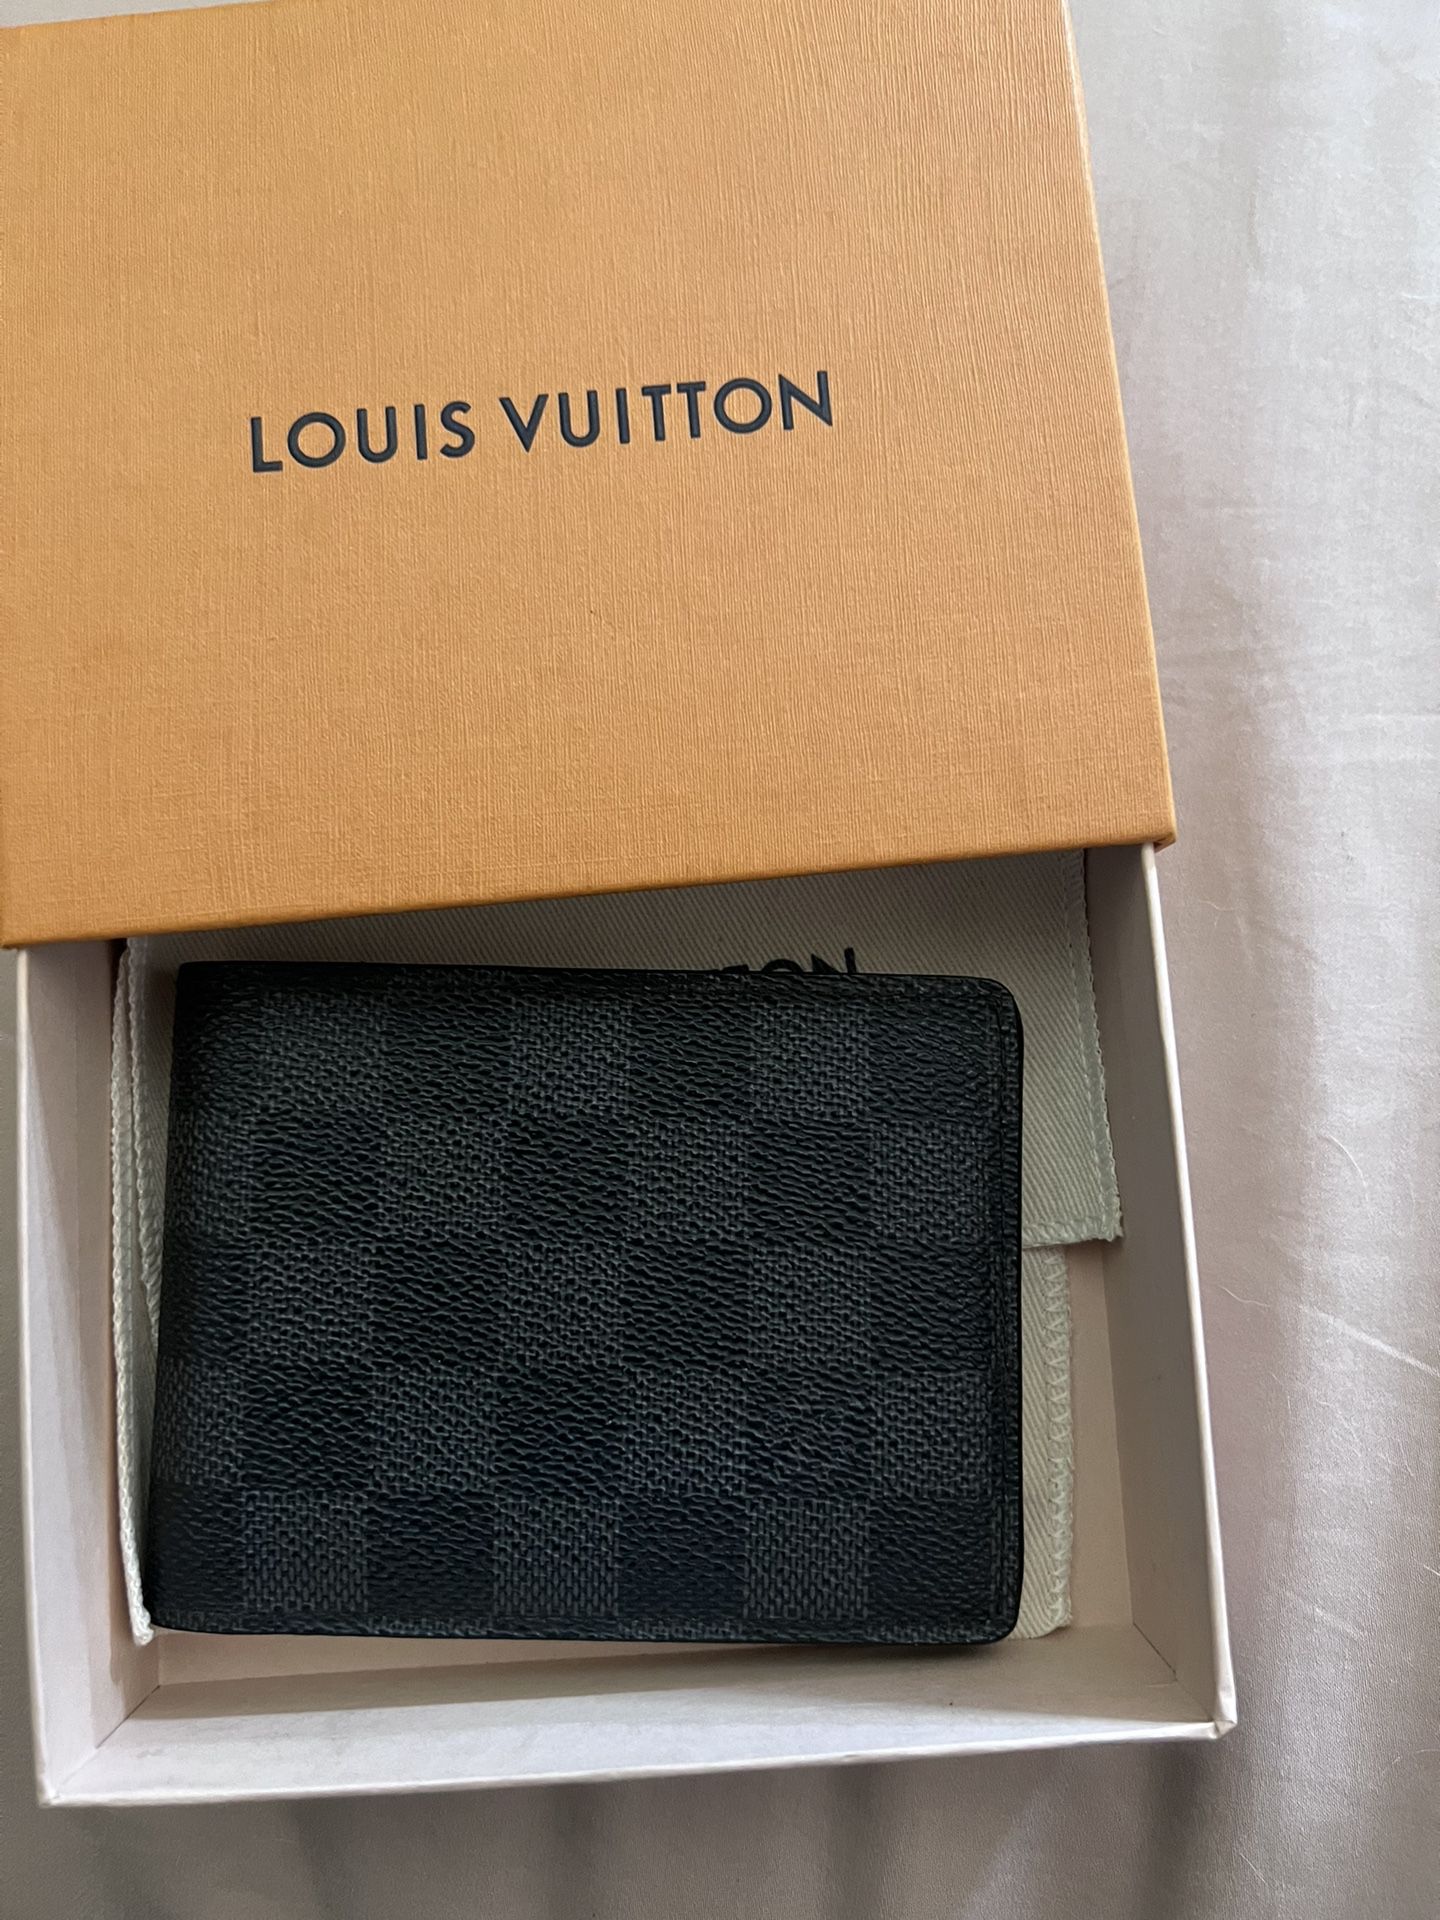 New real louis vuitton wallet for Sale in Chino Hills, CA - OfferUp